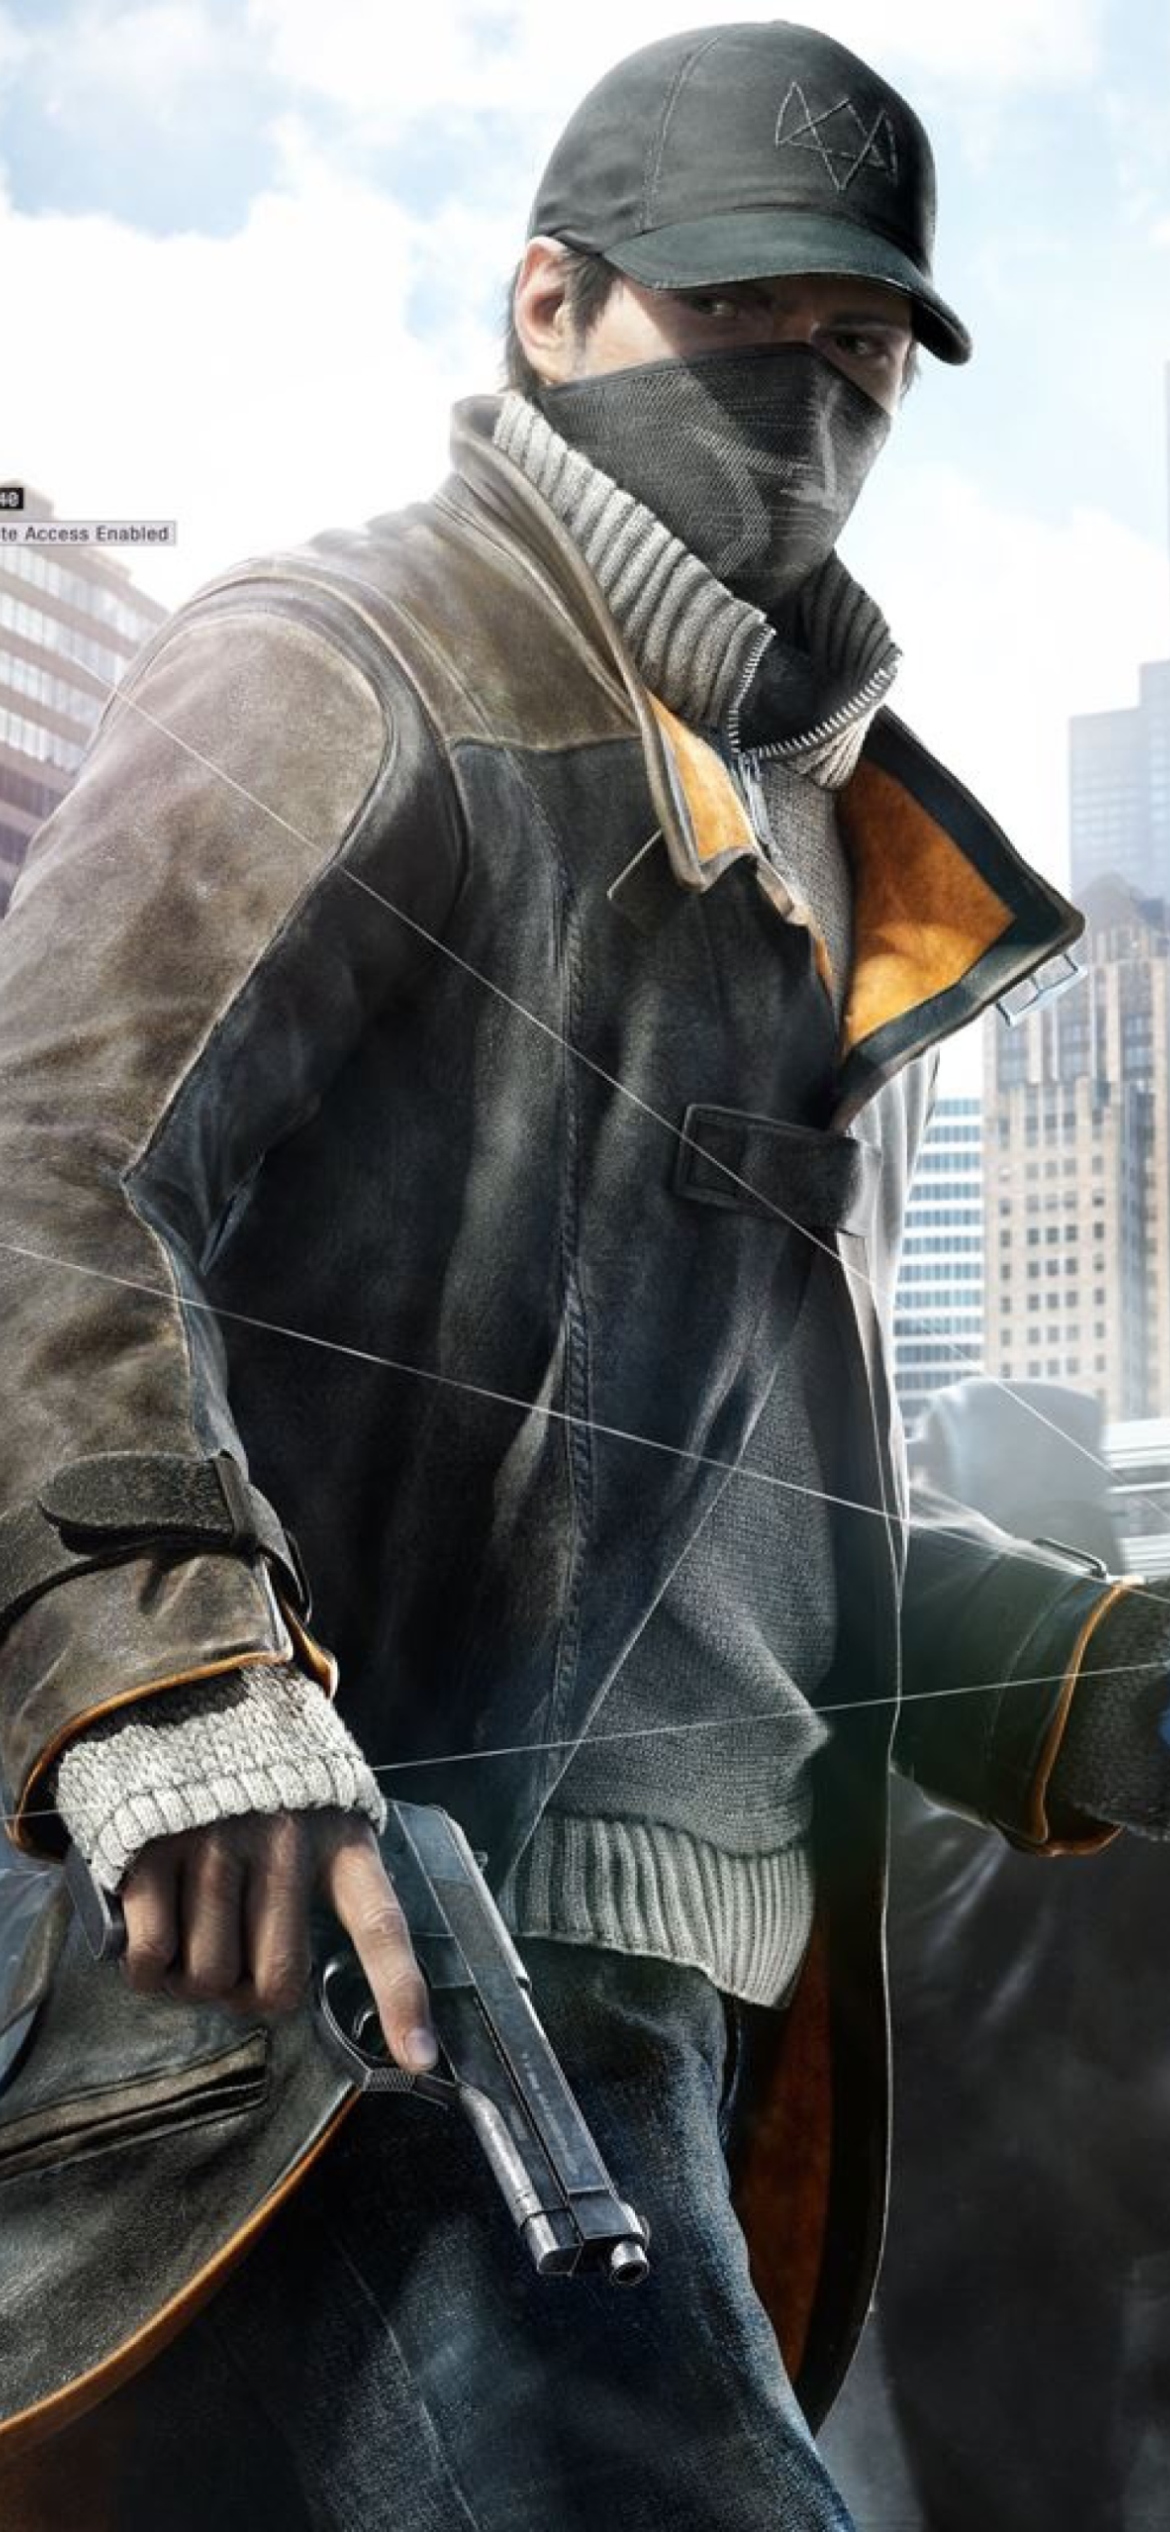 Watch Dogs City Wallpapers  Top Free Watch Dogs City Backgrounds   WallpaperAccess